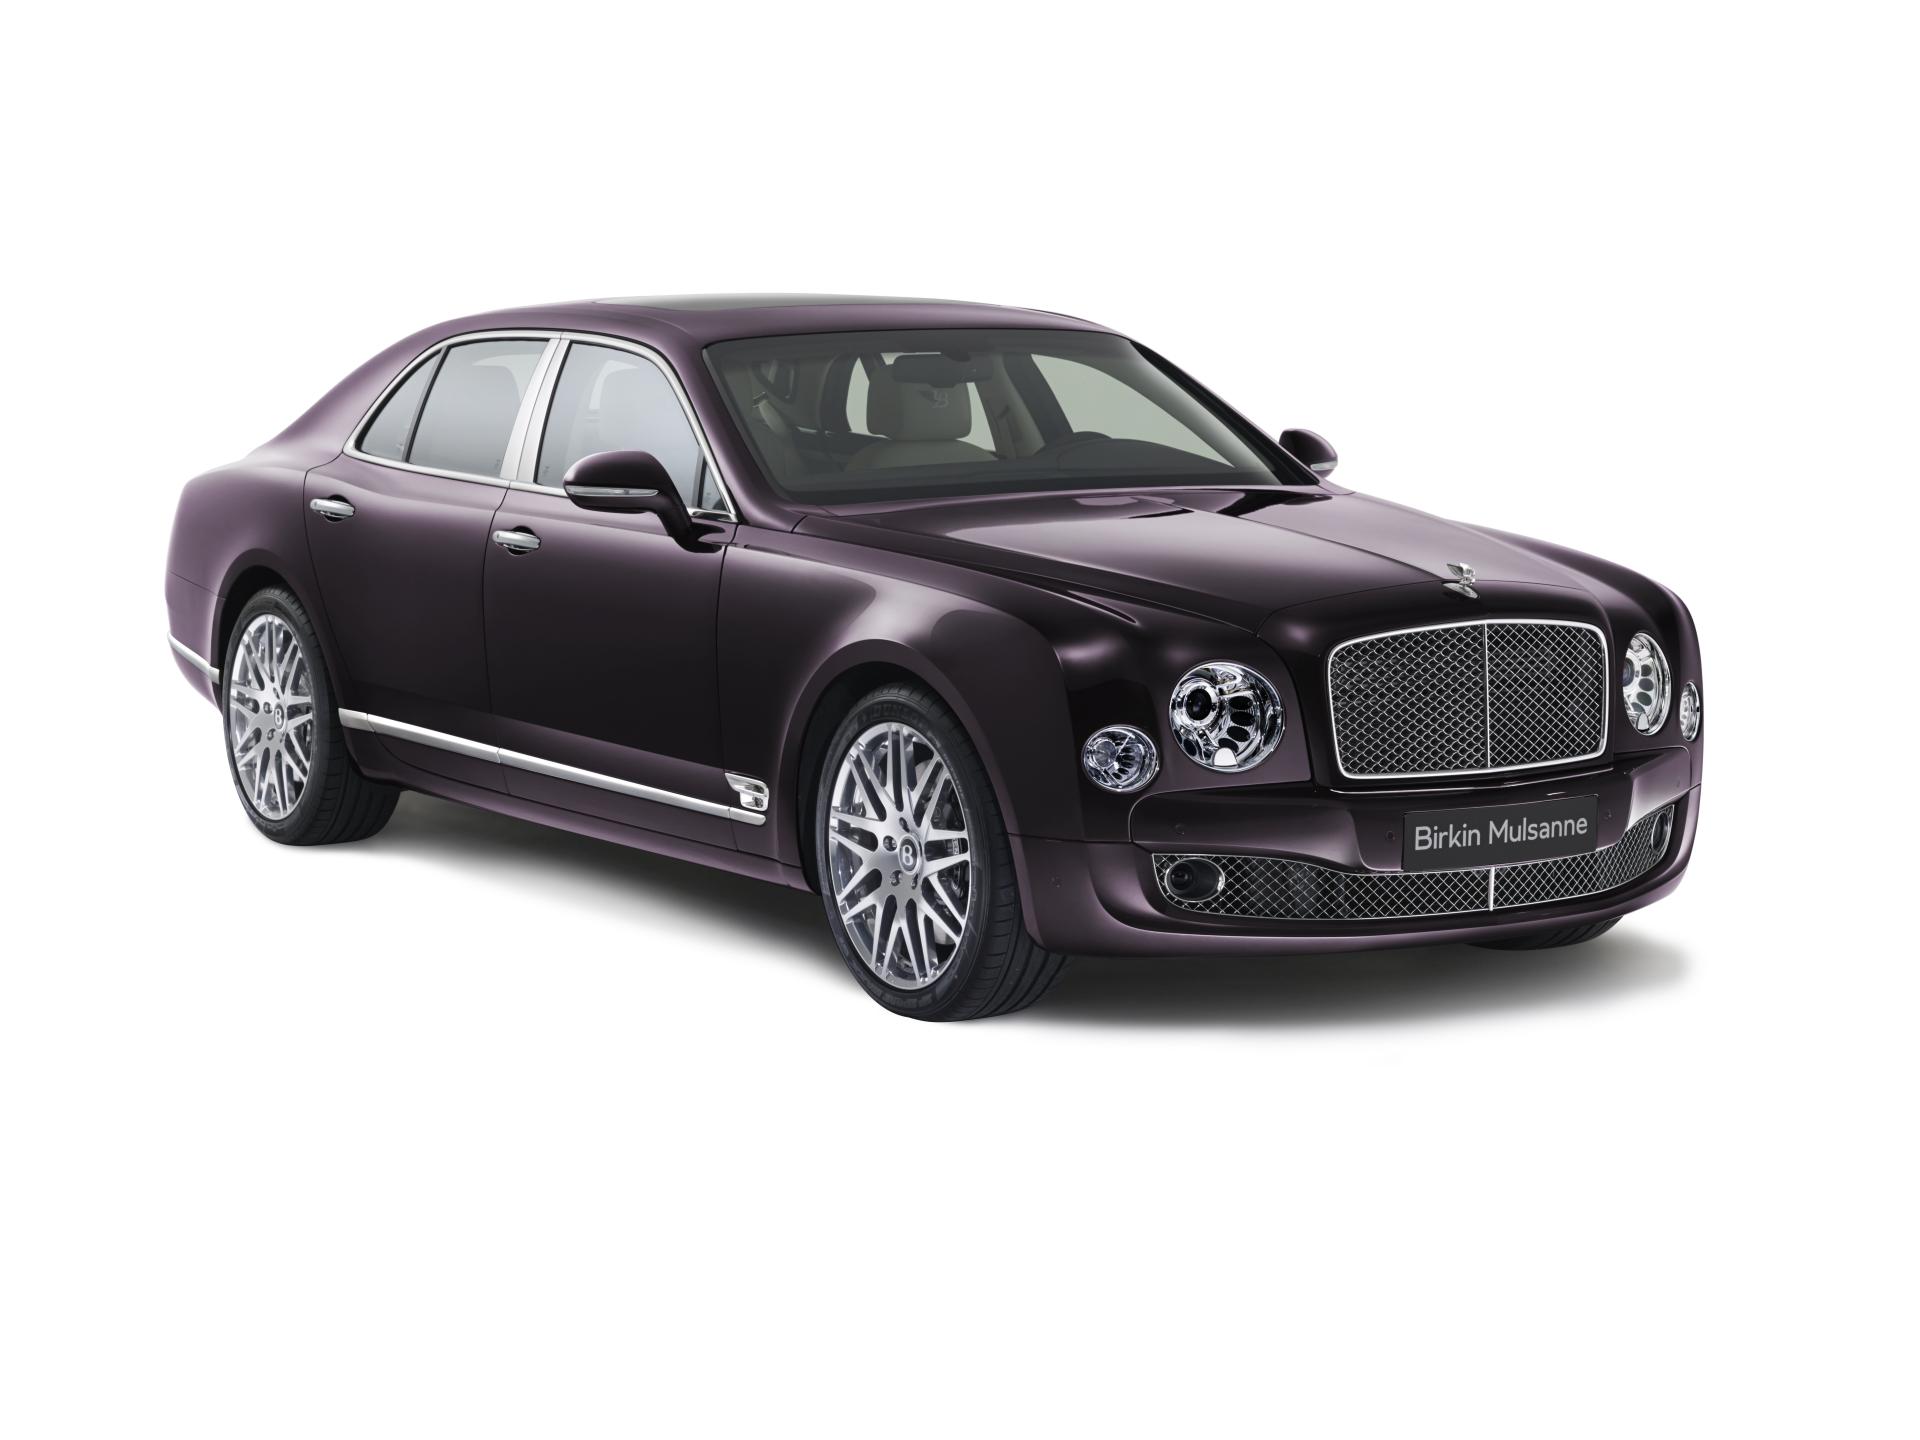   Bentley Mulsanne Seasons Collectors Edition At 2013 Auto Guangzhou